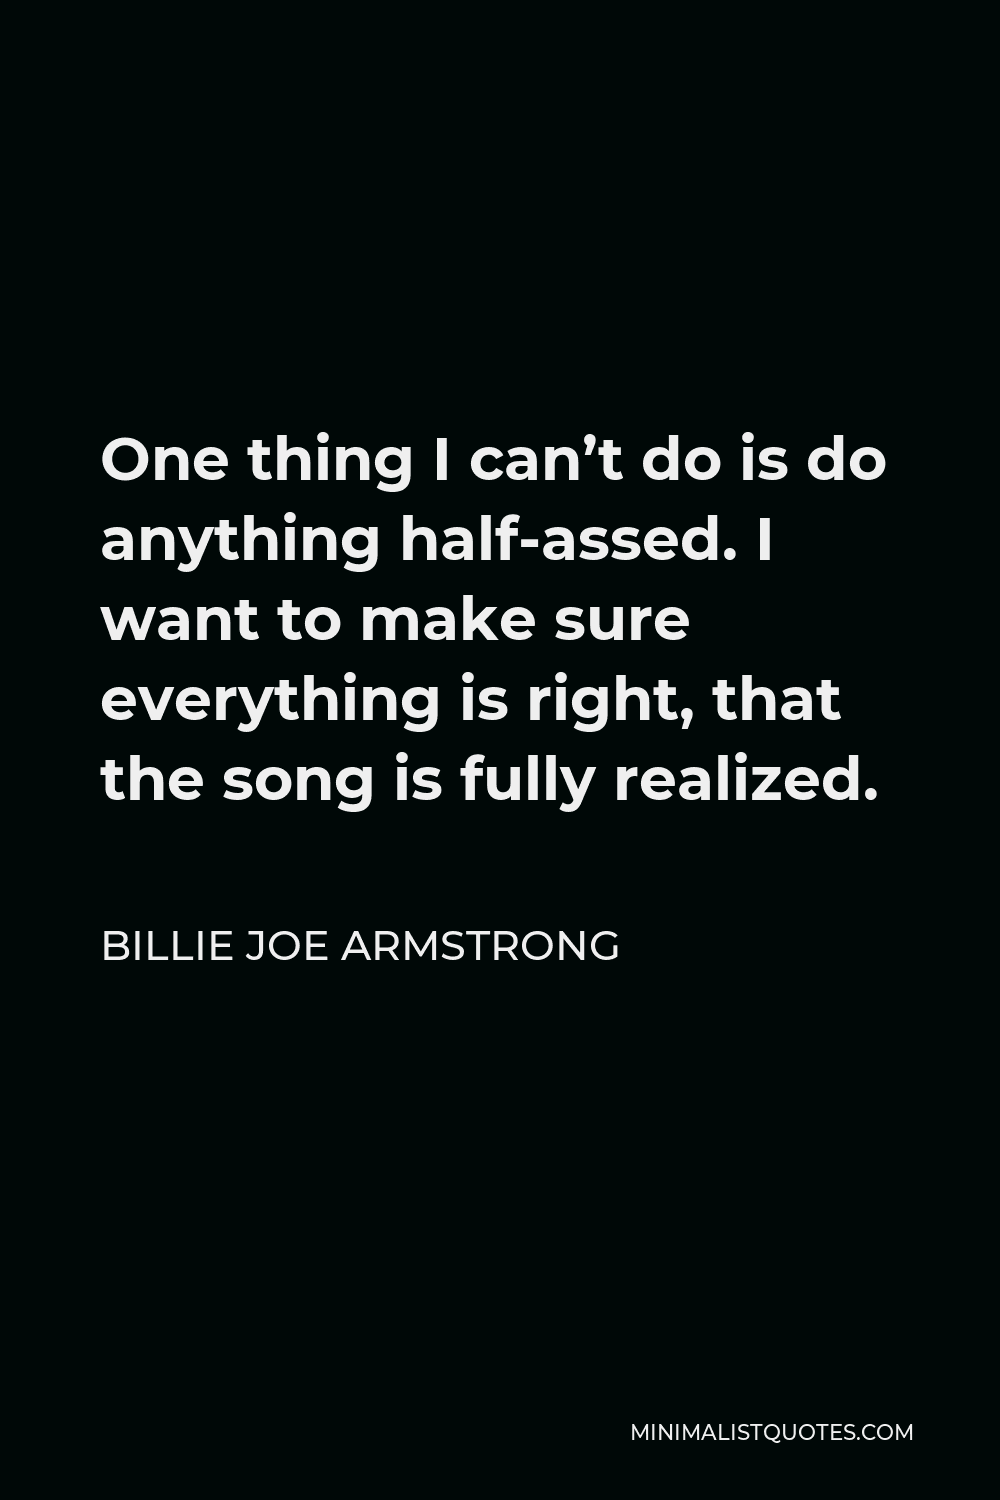 Billie Joe Armstrong Quote - One thing I can’t do is do anything half-assed. I want to make sure everything is right, that the song is fully realized.